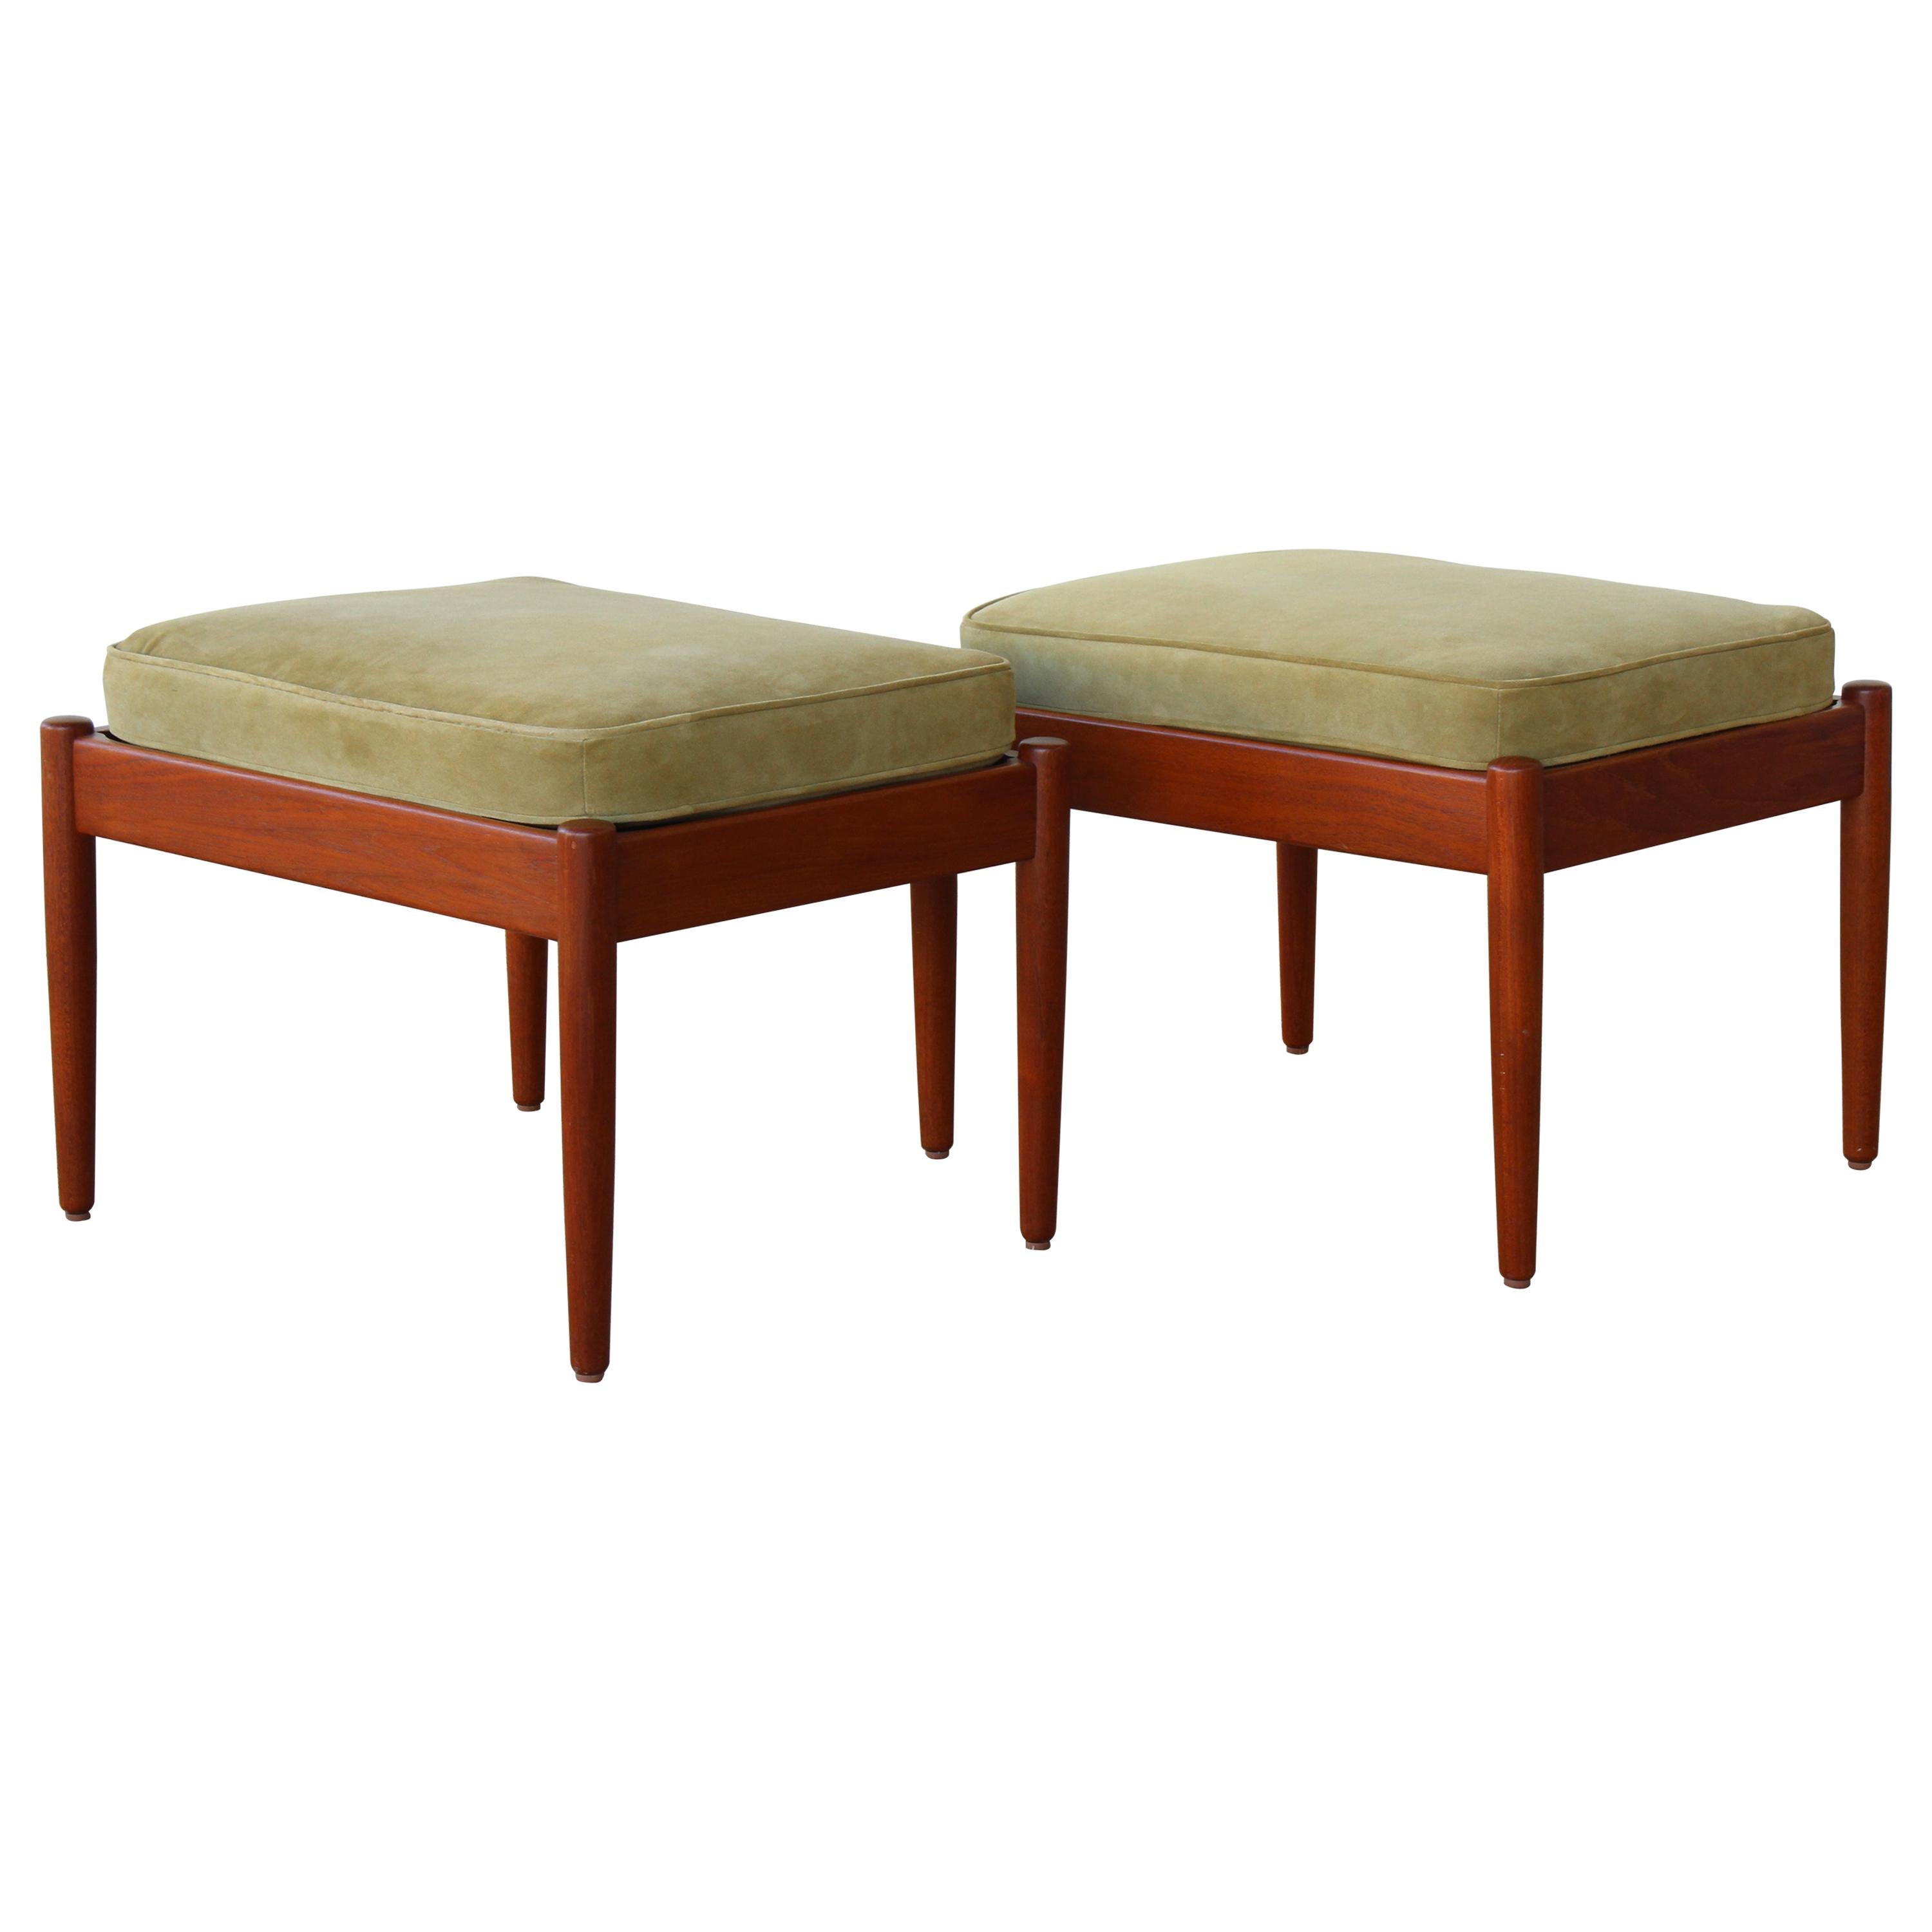 Pair of Teak Stools with Suede Cushions, Denmark, 1960s